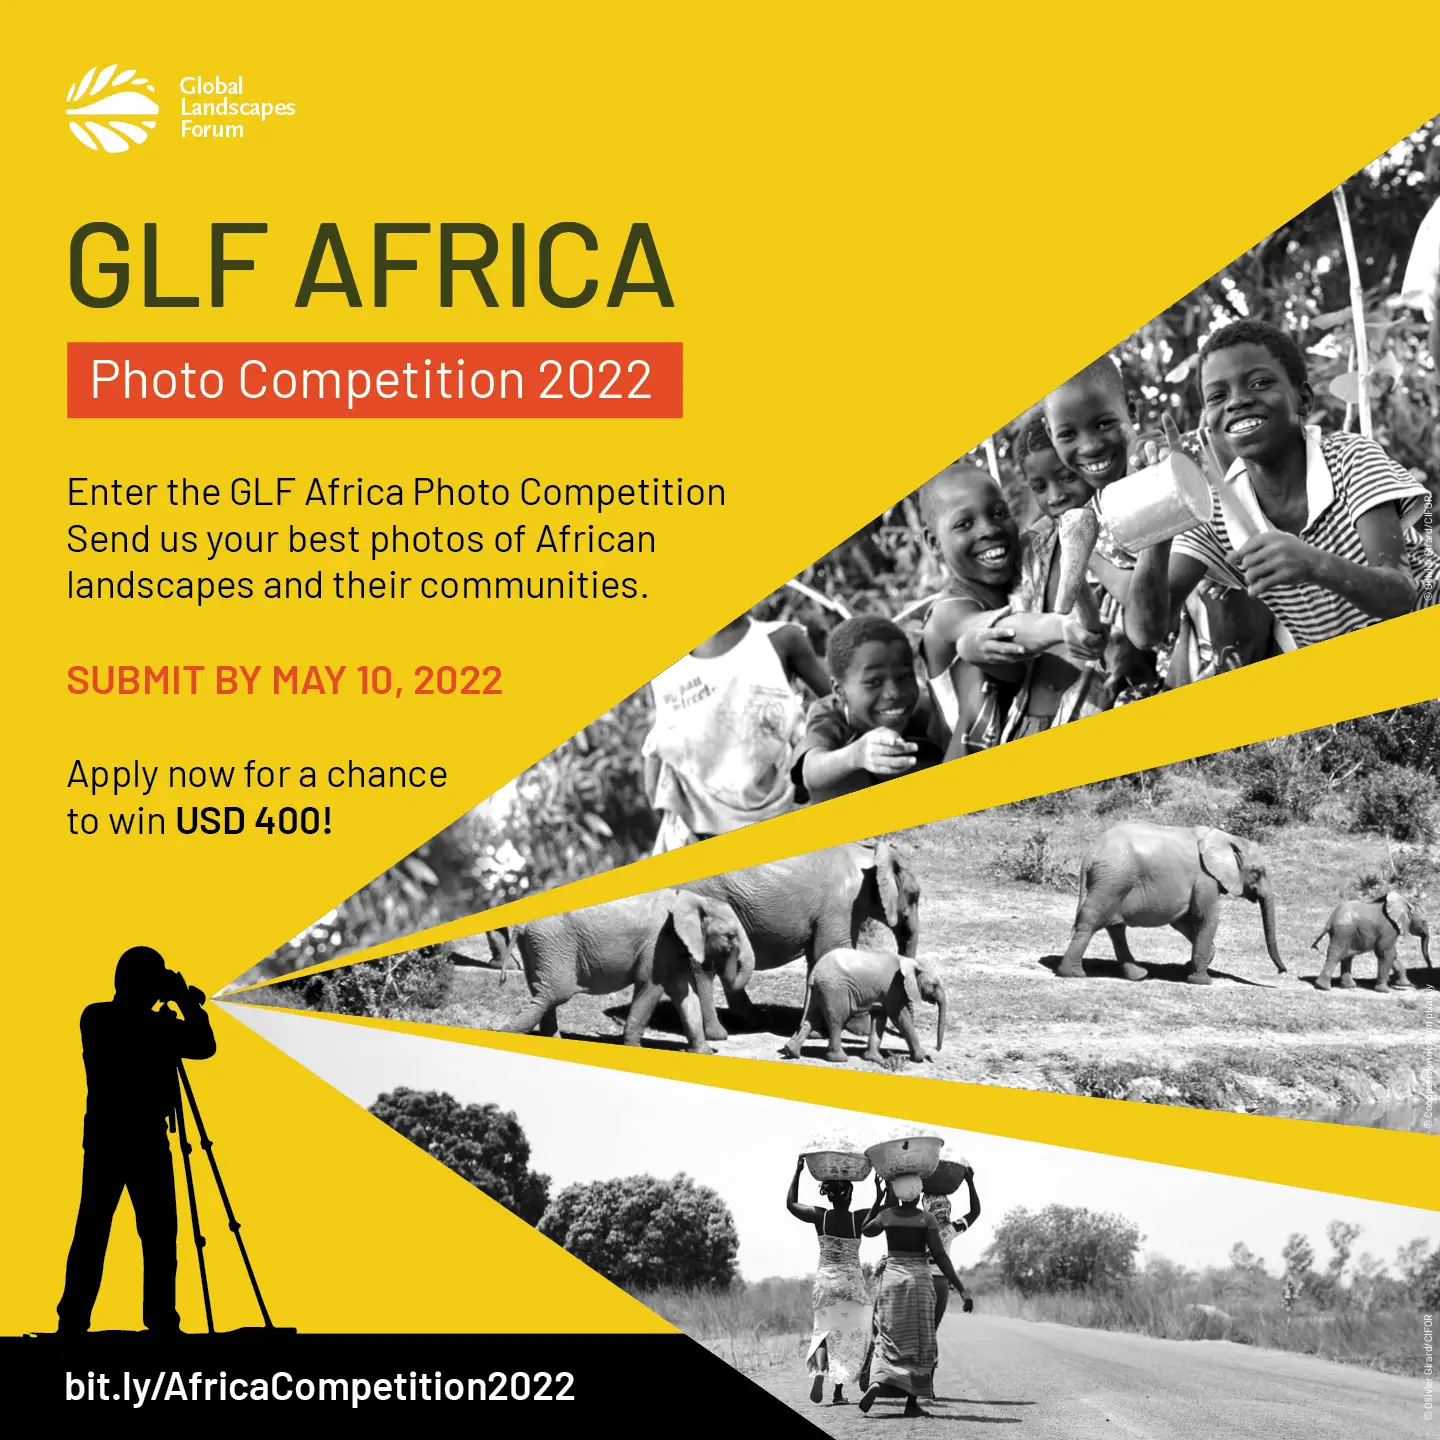 GLF AFRICA PHOTO COMPETITION 2022